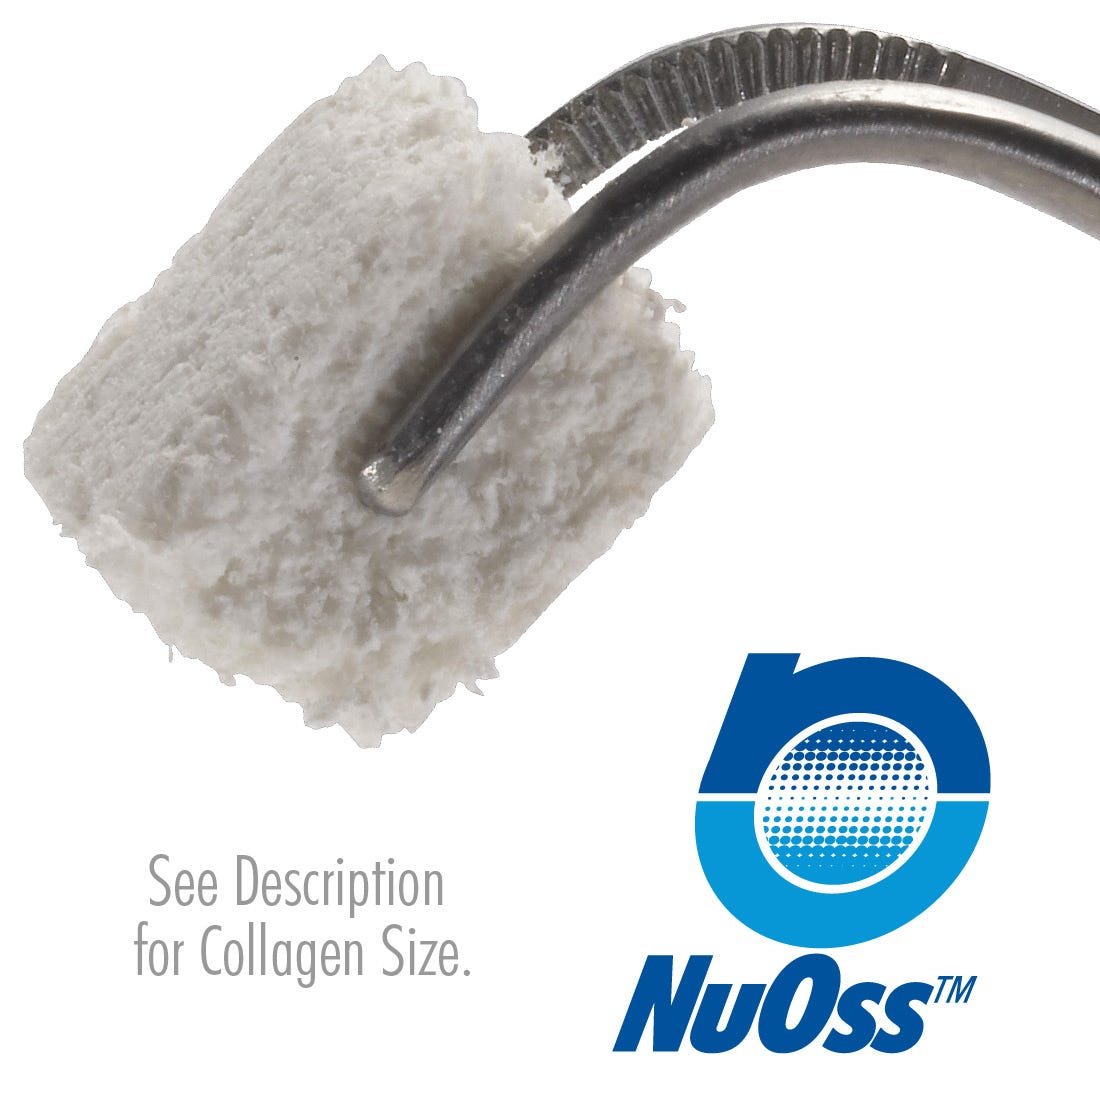 NuOss® Collagen - (500mg approx.) 10mm x 11mm x 12mm